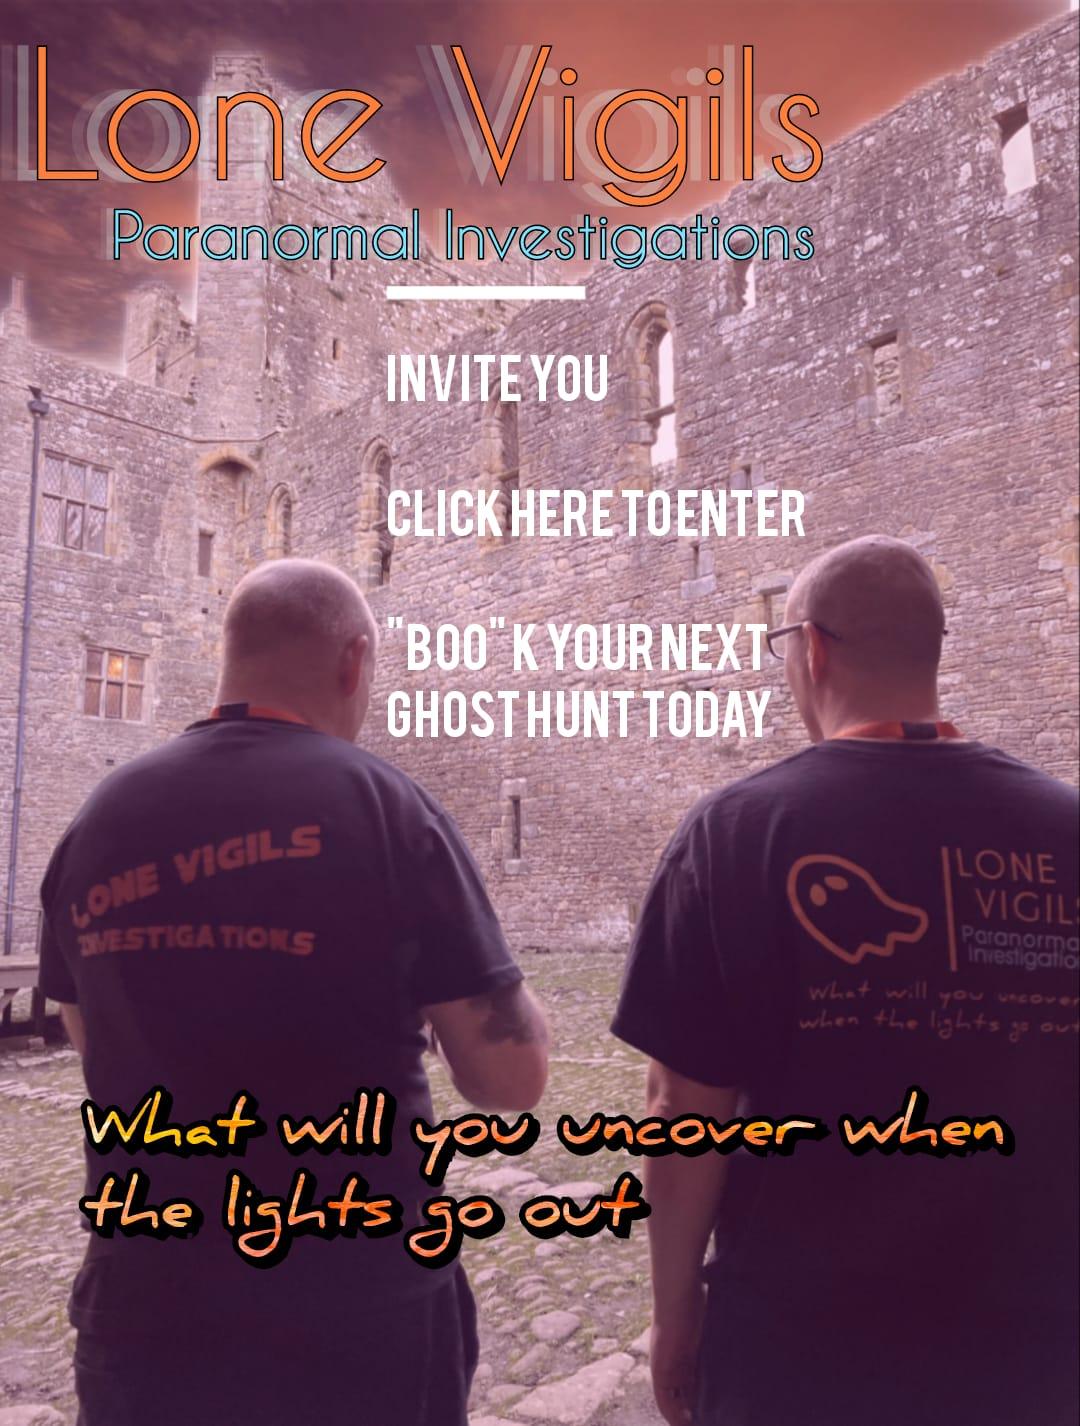 Lone Vigils Paranormal Investigations North East Ghost Hunting